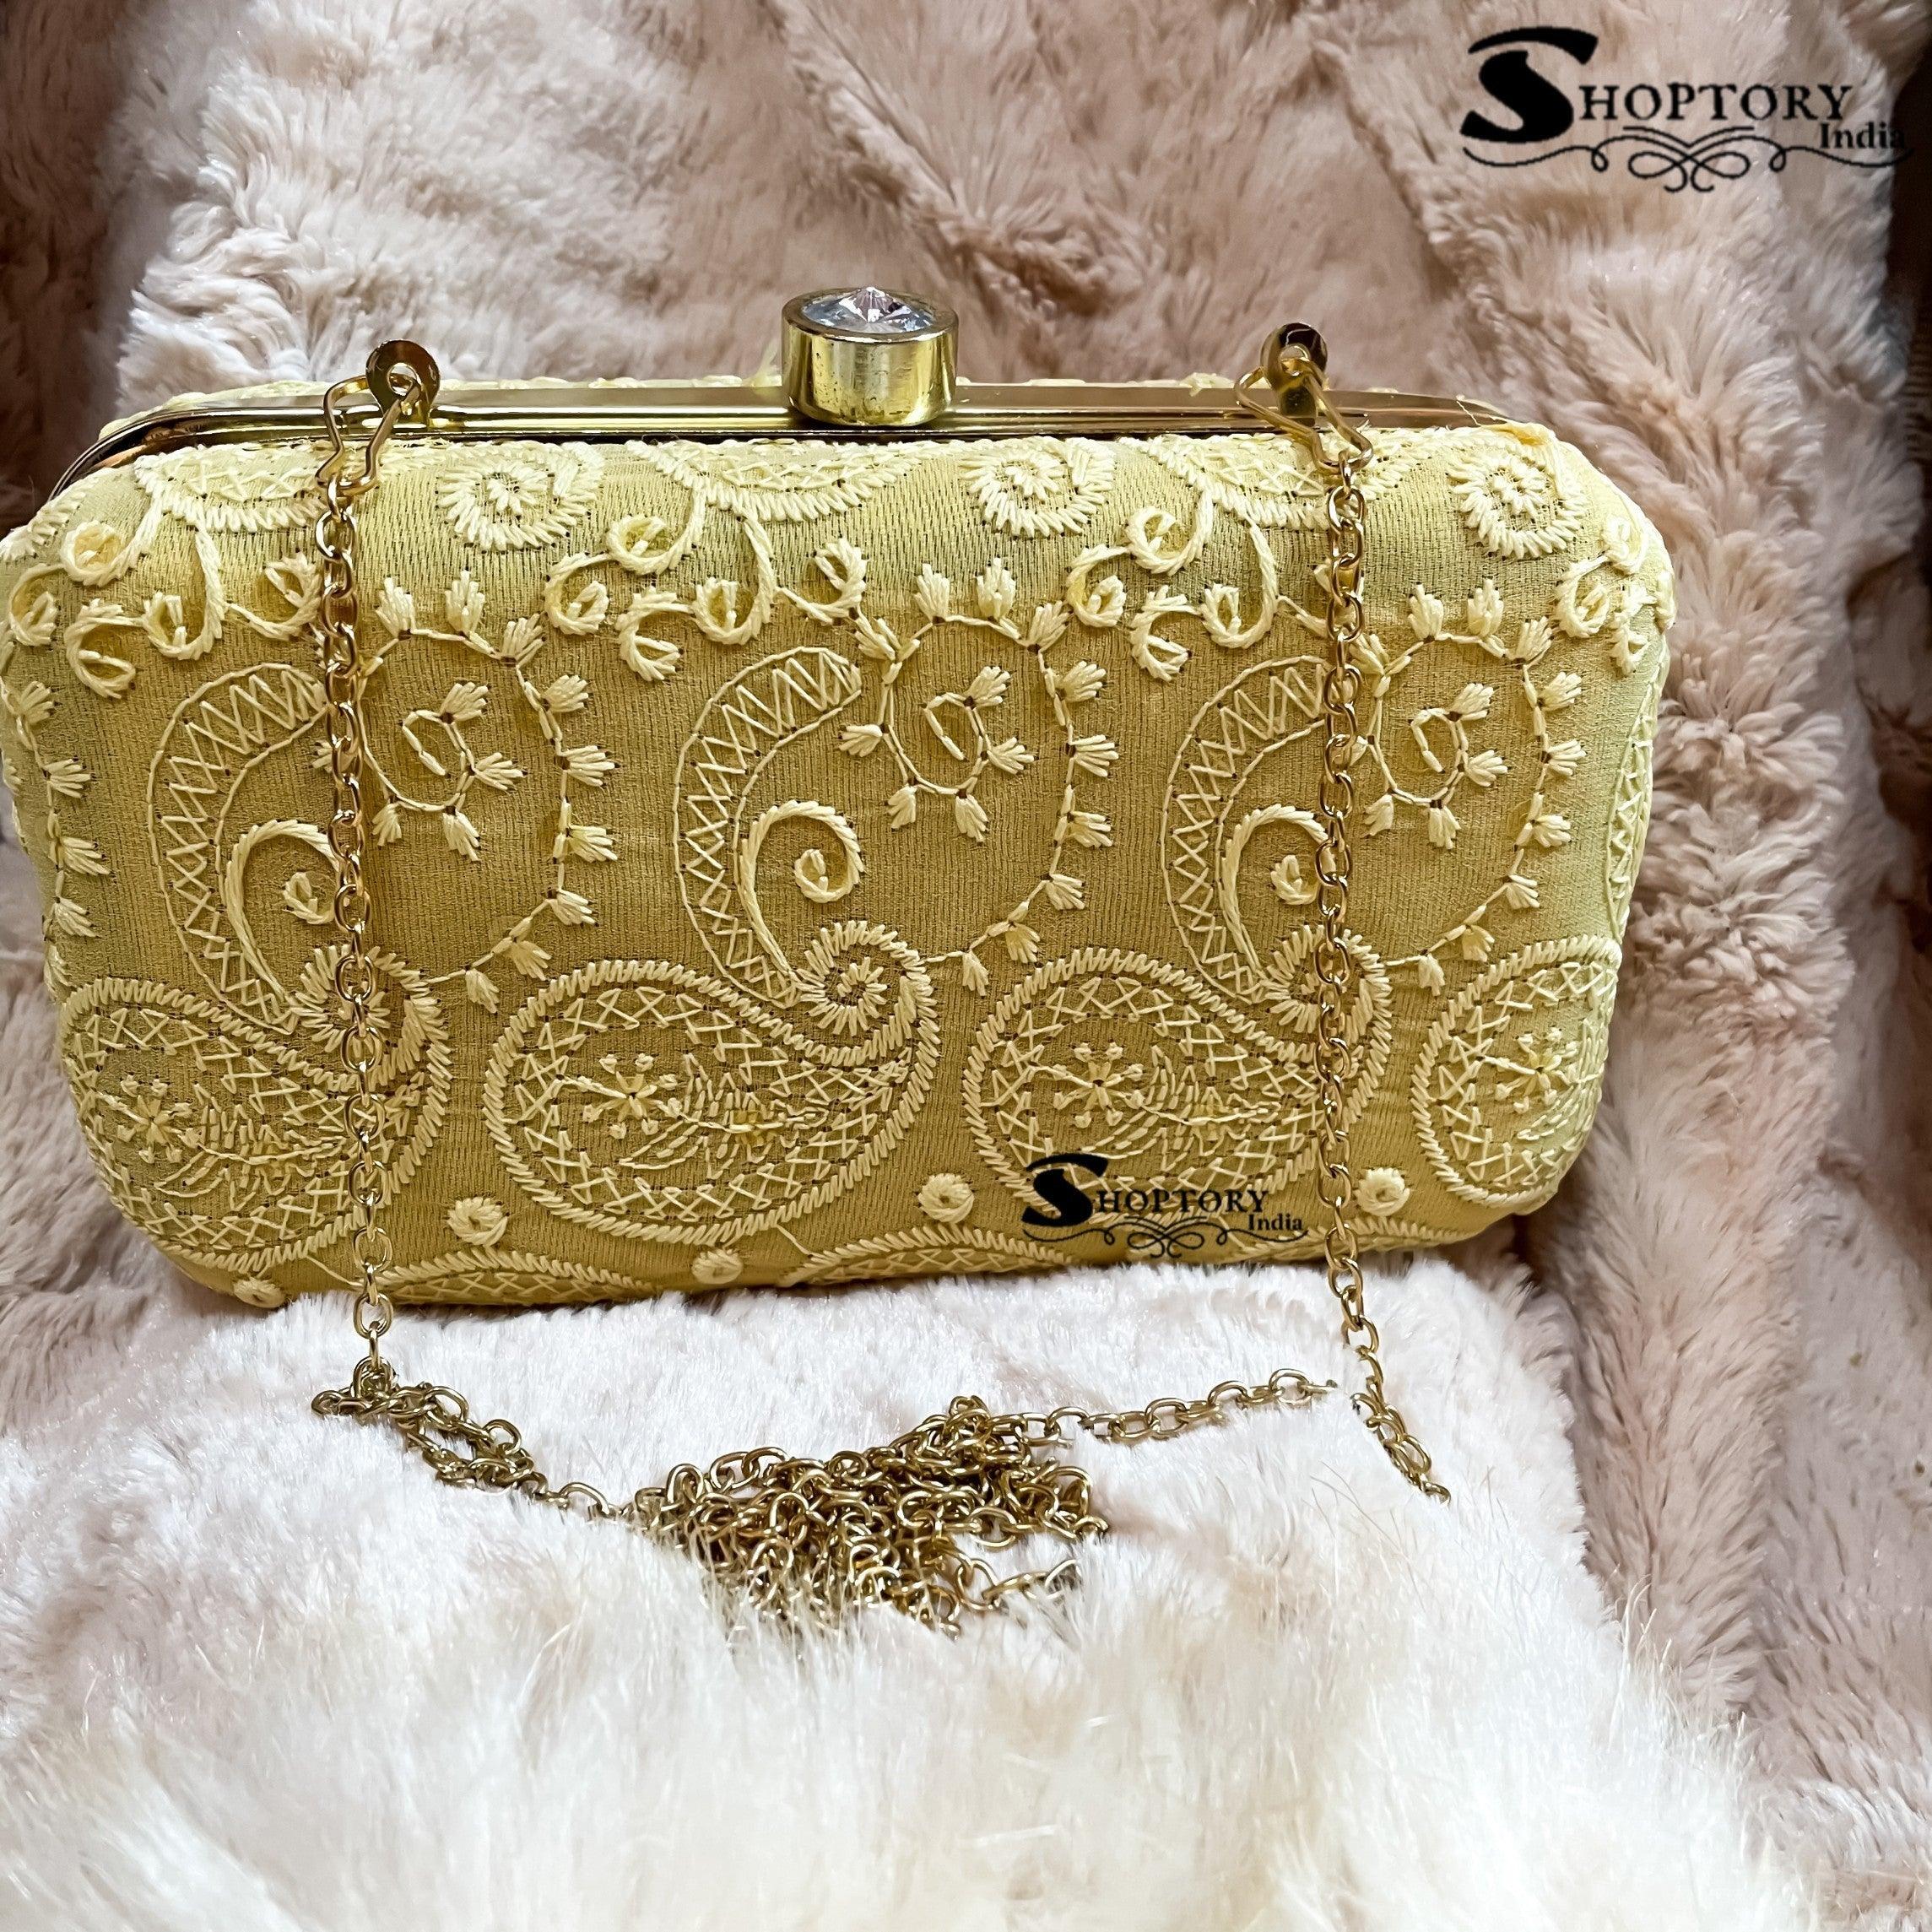 Wedding! ब्राइडल पर्स के लेटेस्ट डिजाइन्स - glamourous purses to carry on  your wedding day-mobile